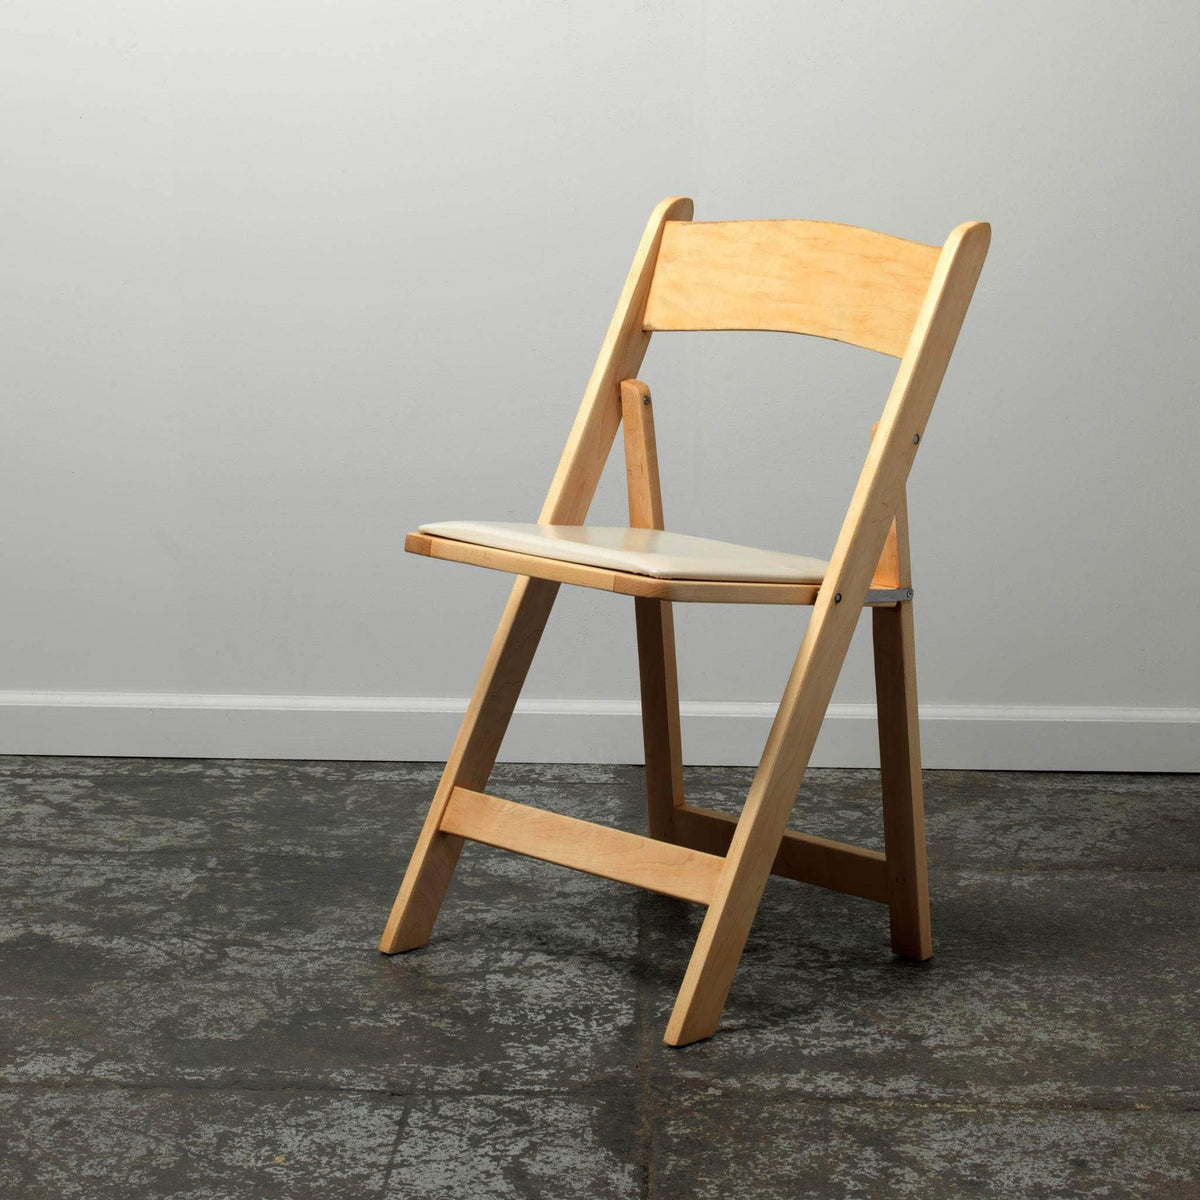 Natural Wooden Folding Chair with Padded Seat